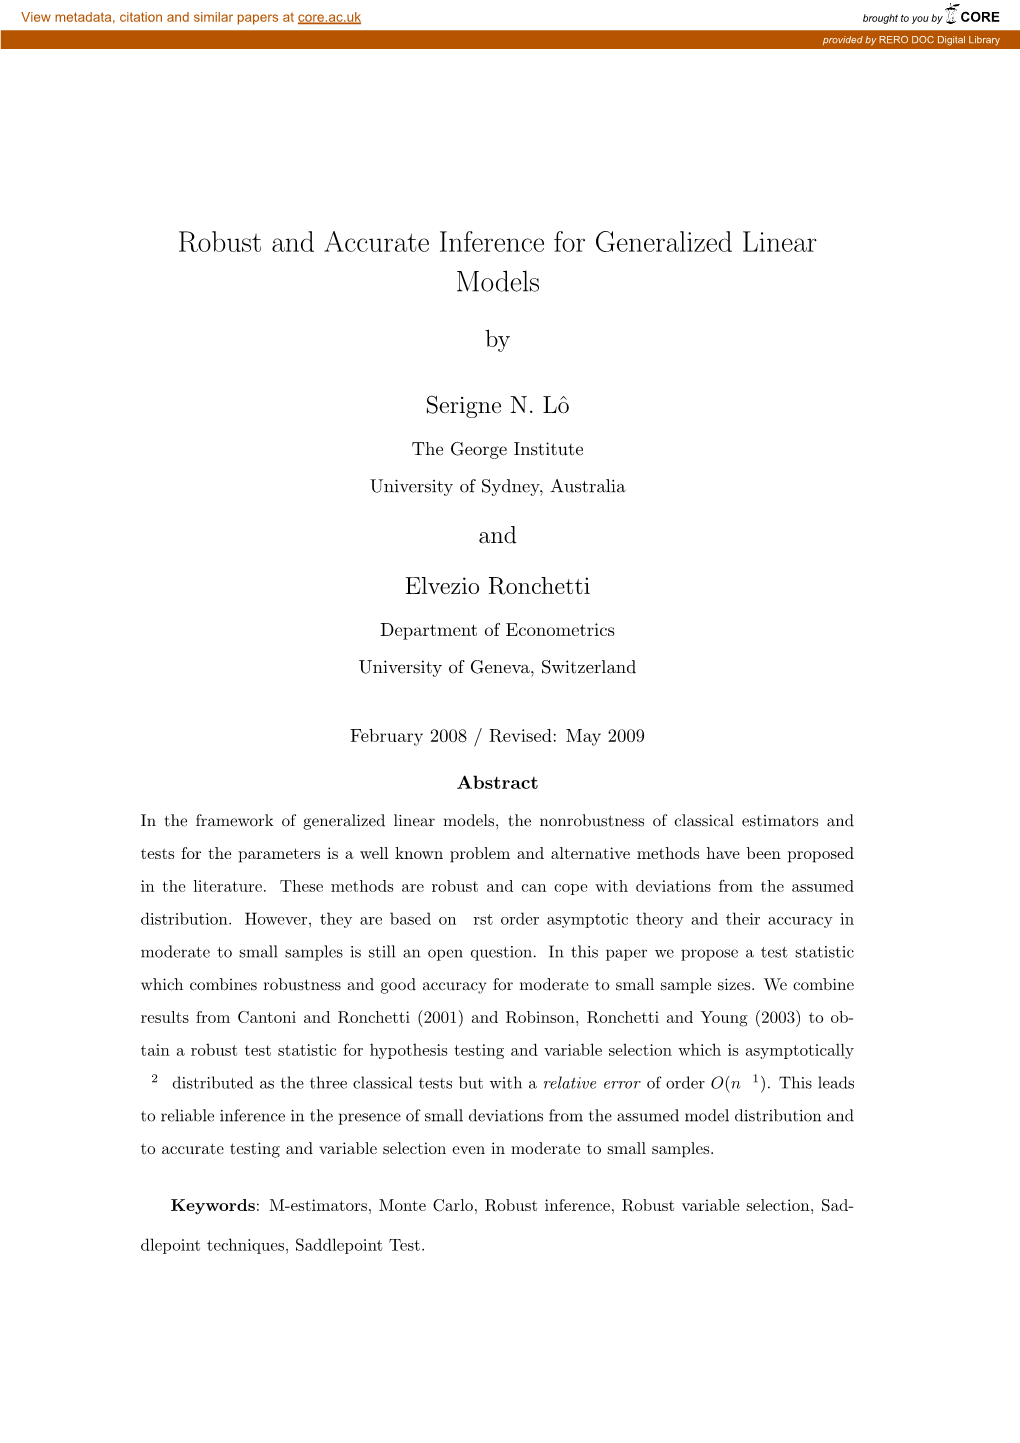 Robust and Accurate Inference for Generalized Linear Models